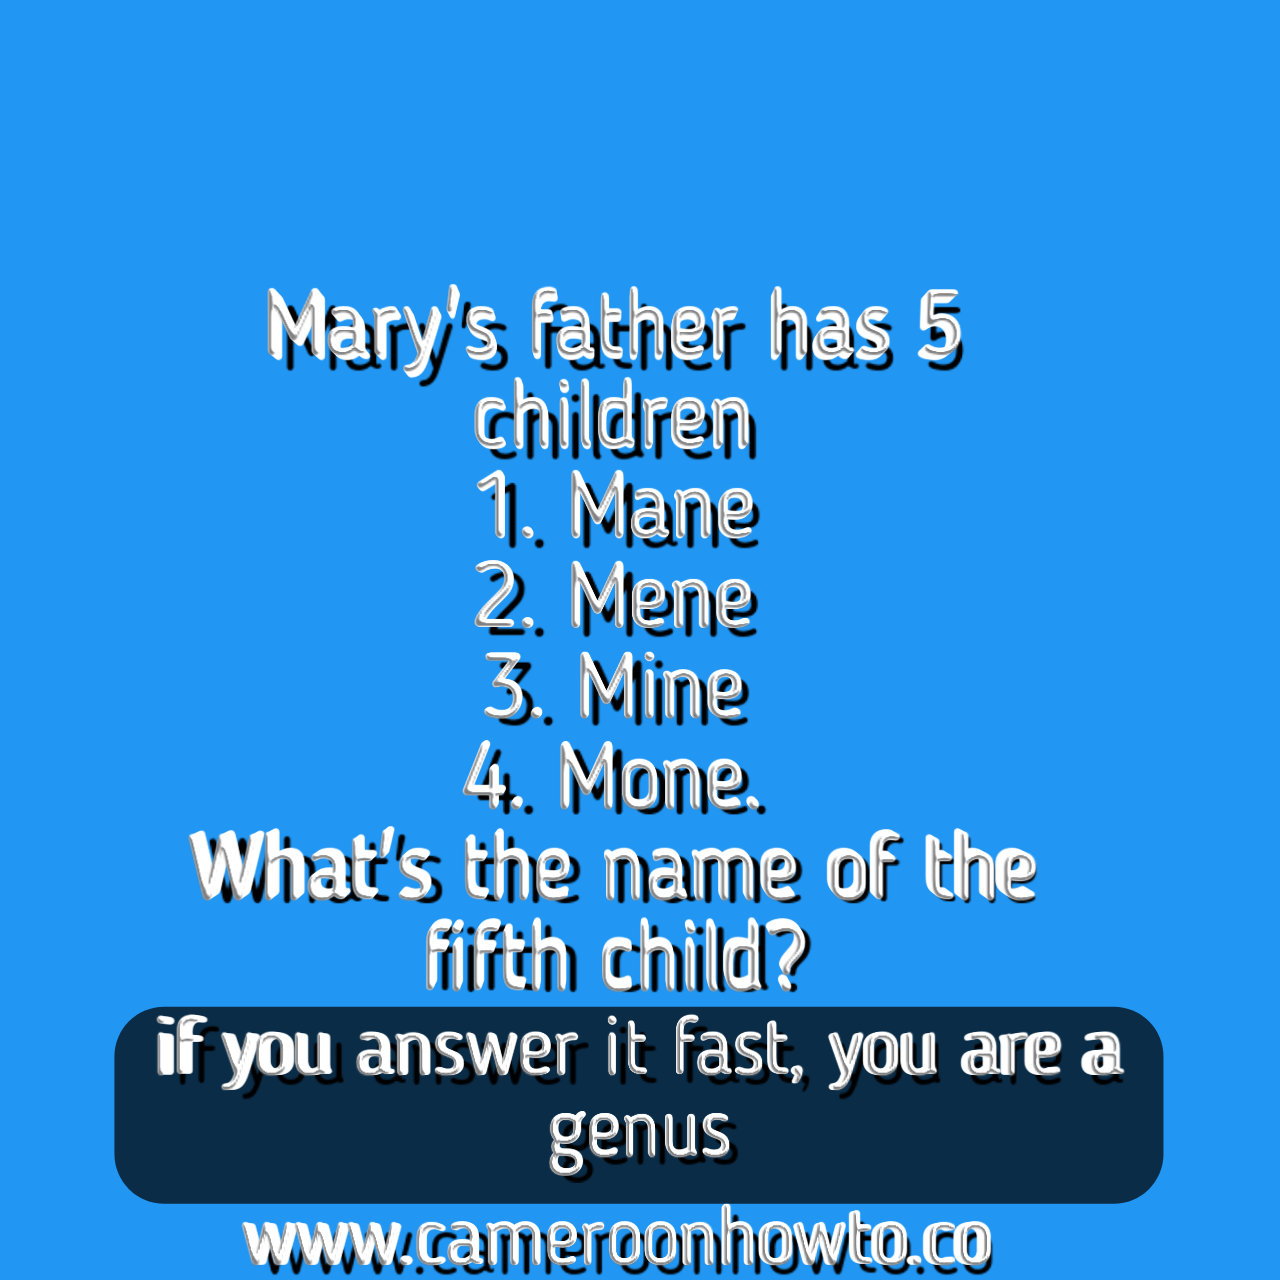 Mary's father has 5 Children riddle answer